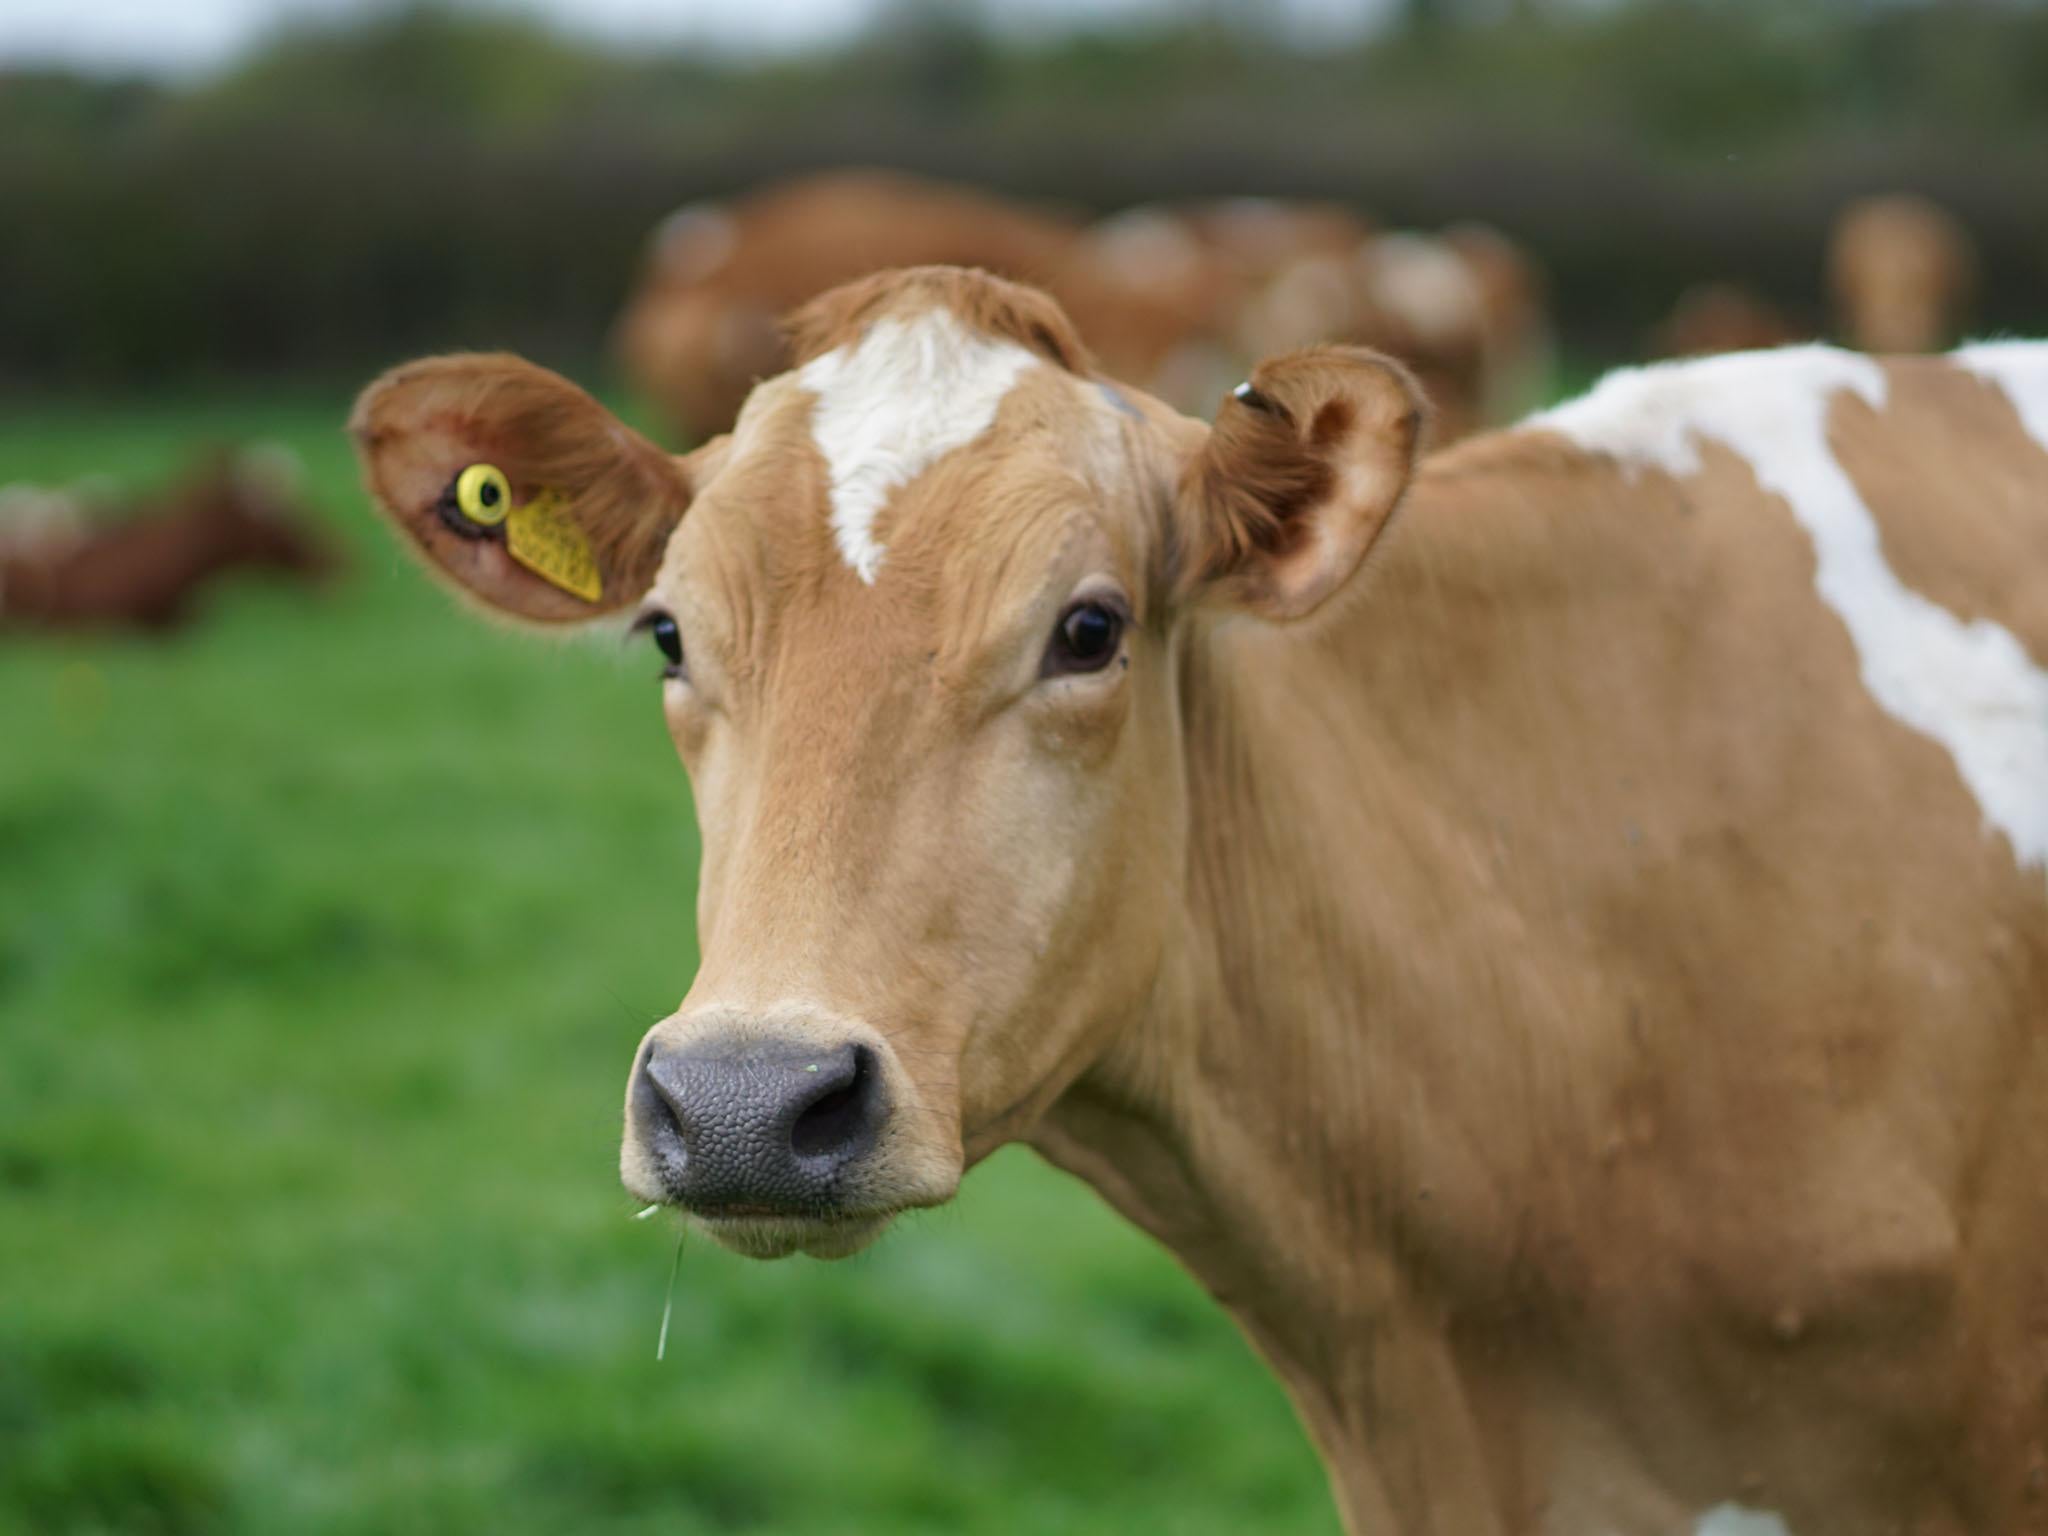 ‘Cattle are not, in fact, a climate problem at all; they are actually among the most practical, cost-effective solutions to the warming of the planet’